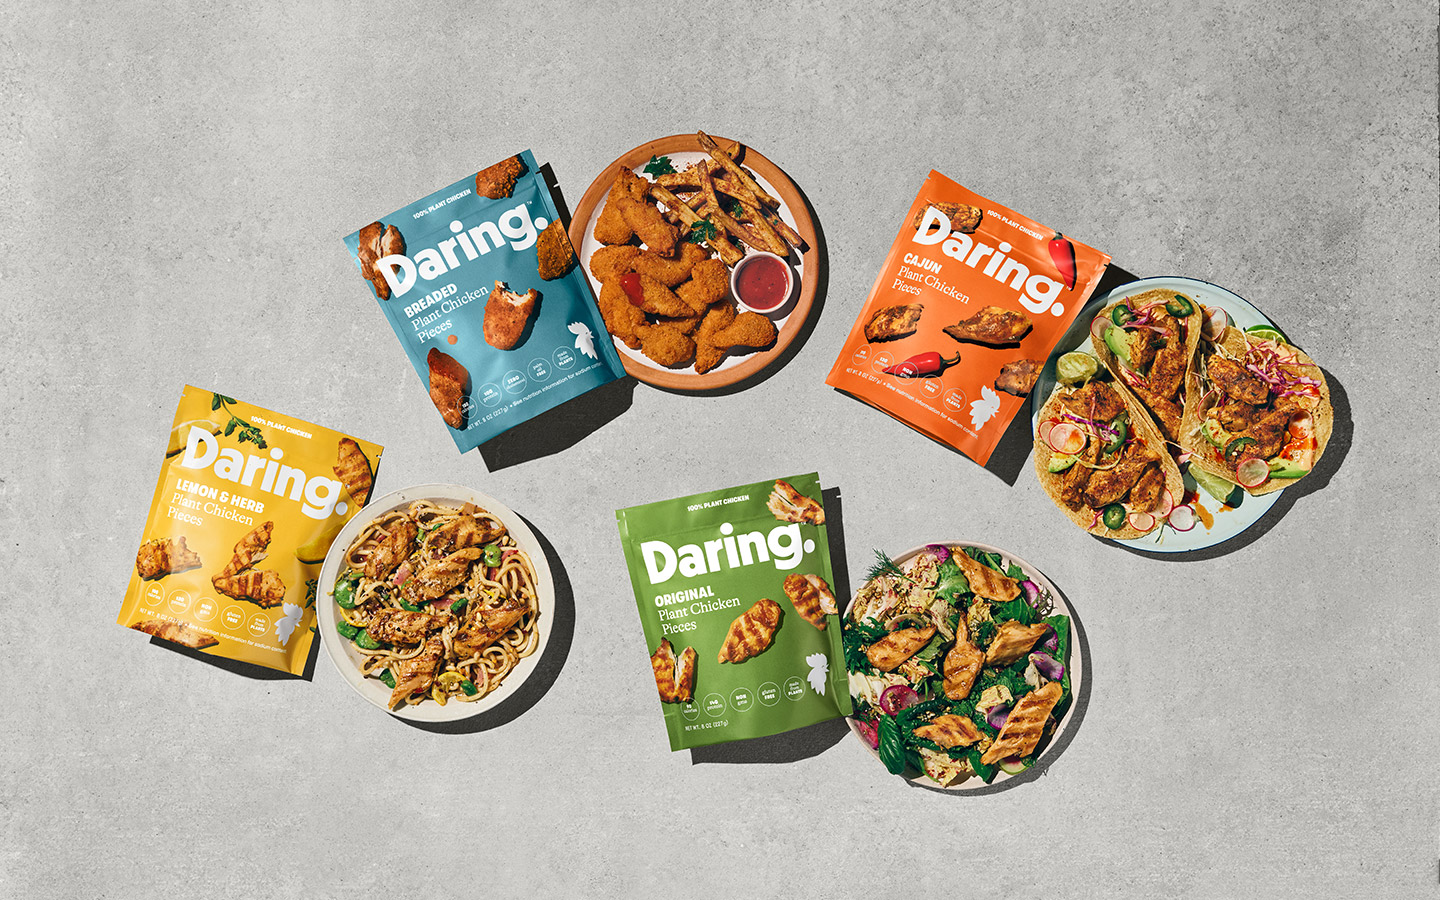 Daring pouches in 4 flavors